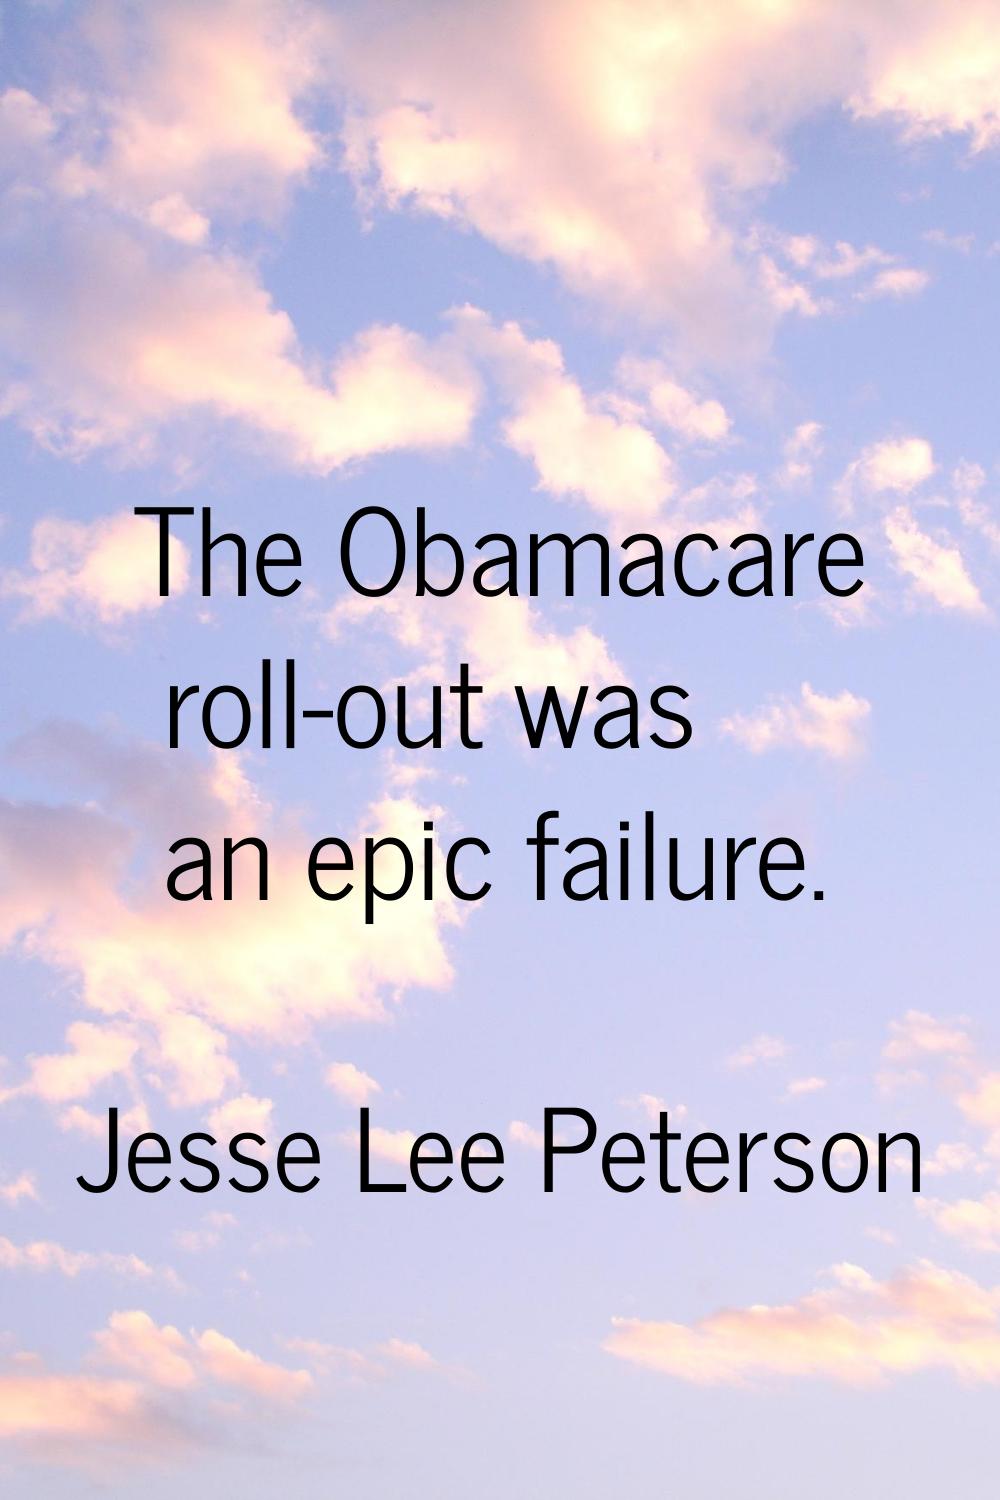 The Obamacare roll-out was an epic failure.